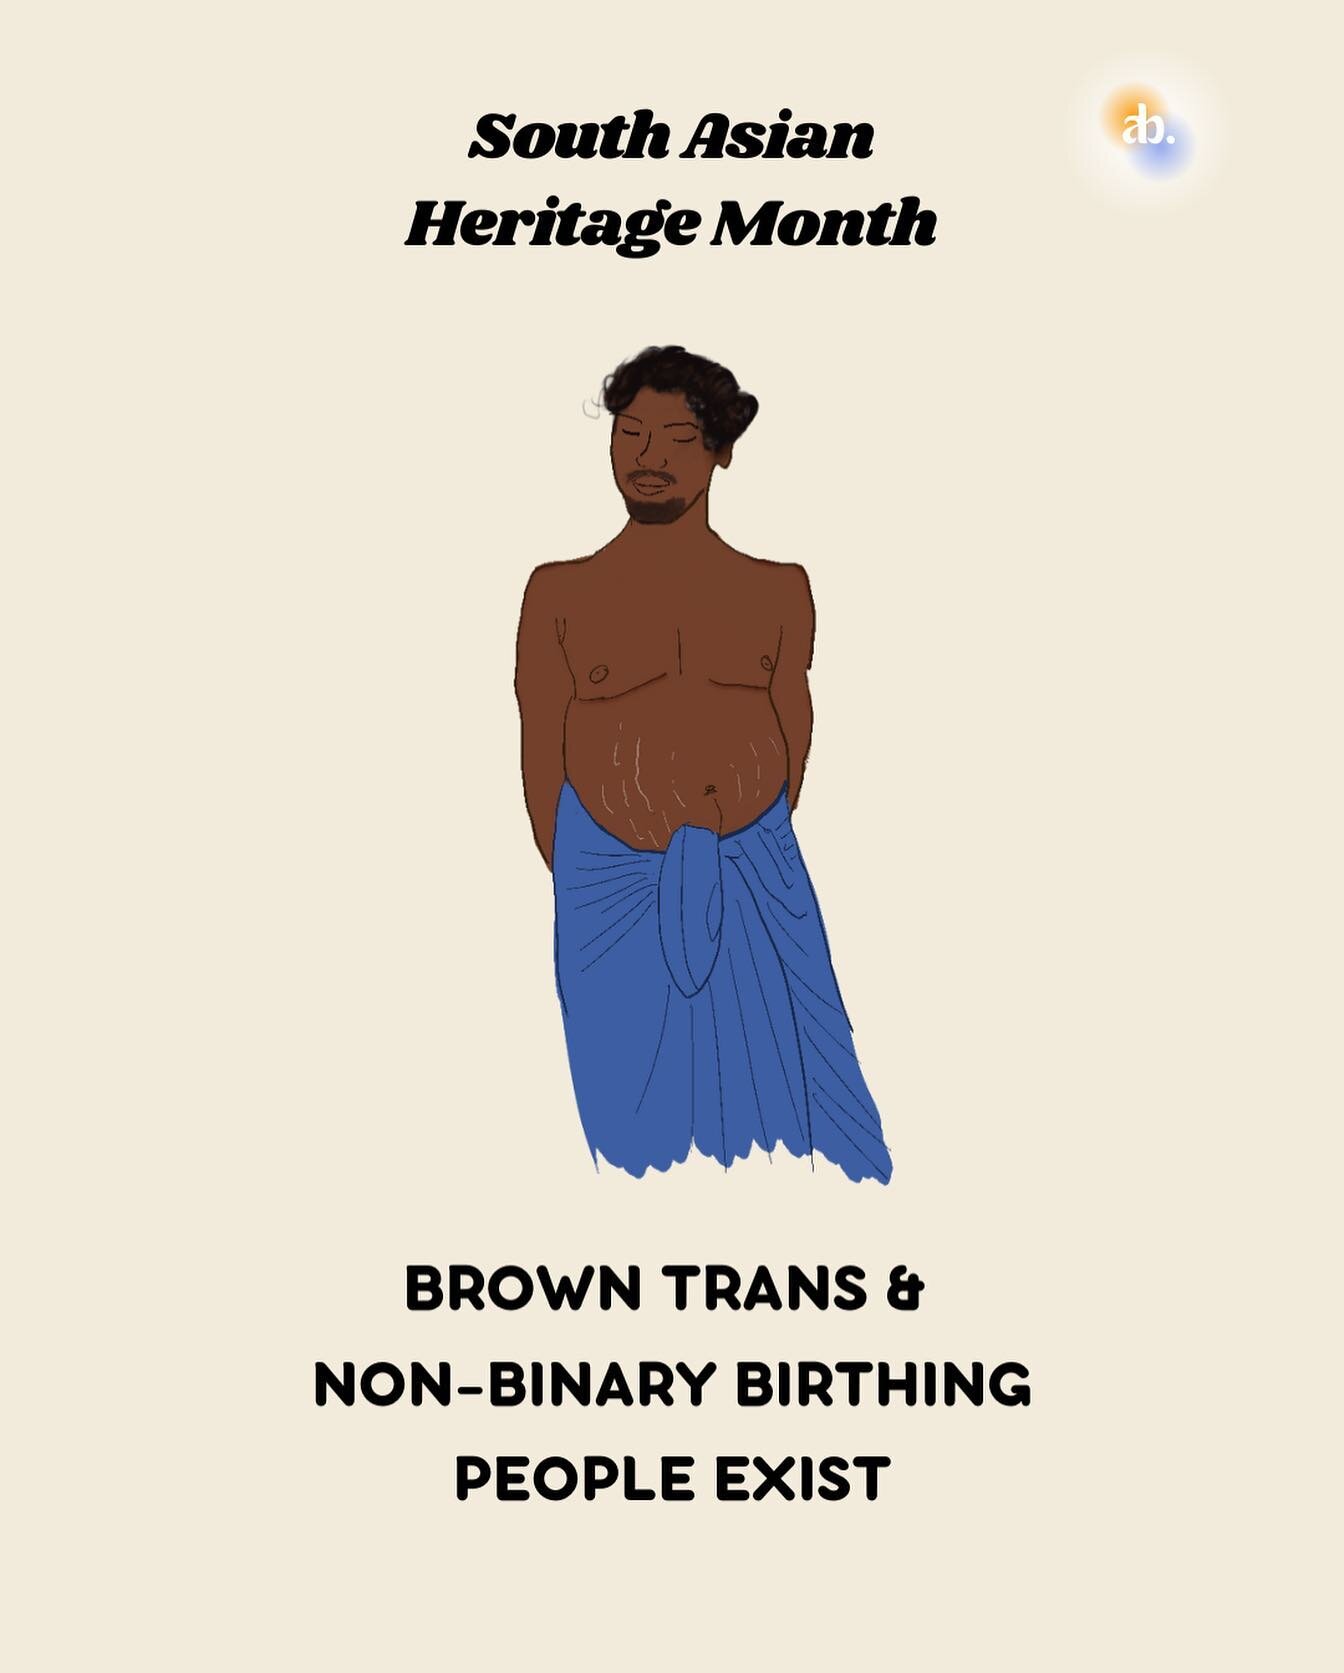 Brown trans and non-binary birthing people exist and always have existed.

We need to really think about our language and make sure that we represent everyone when we talk about who deserves affirming perinatal care.

[ID: Brown trans pregnant person